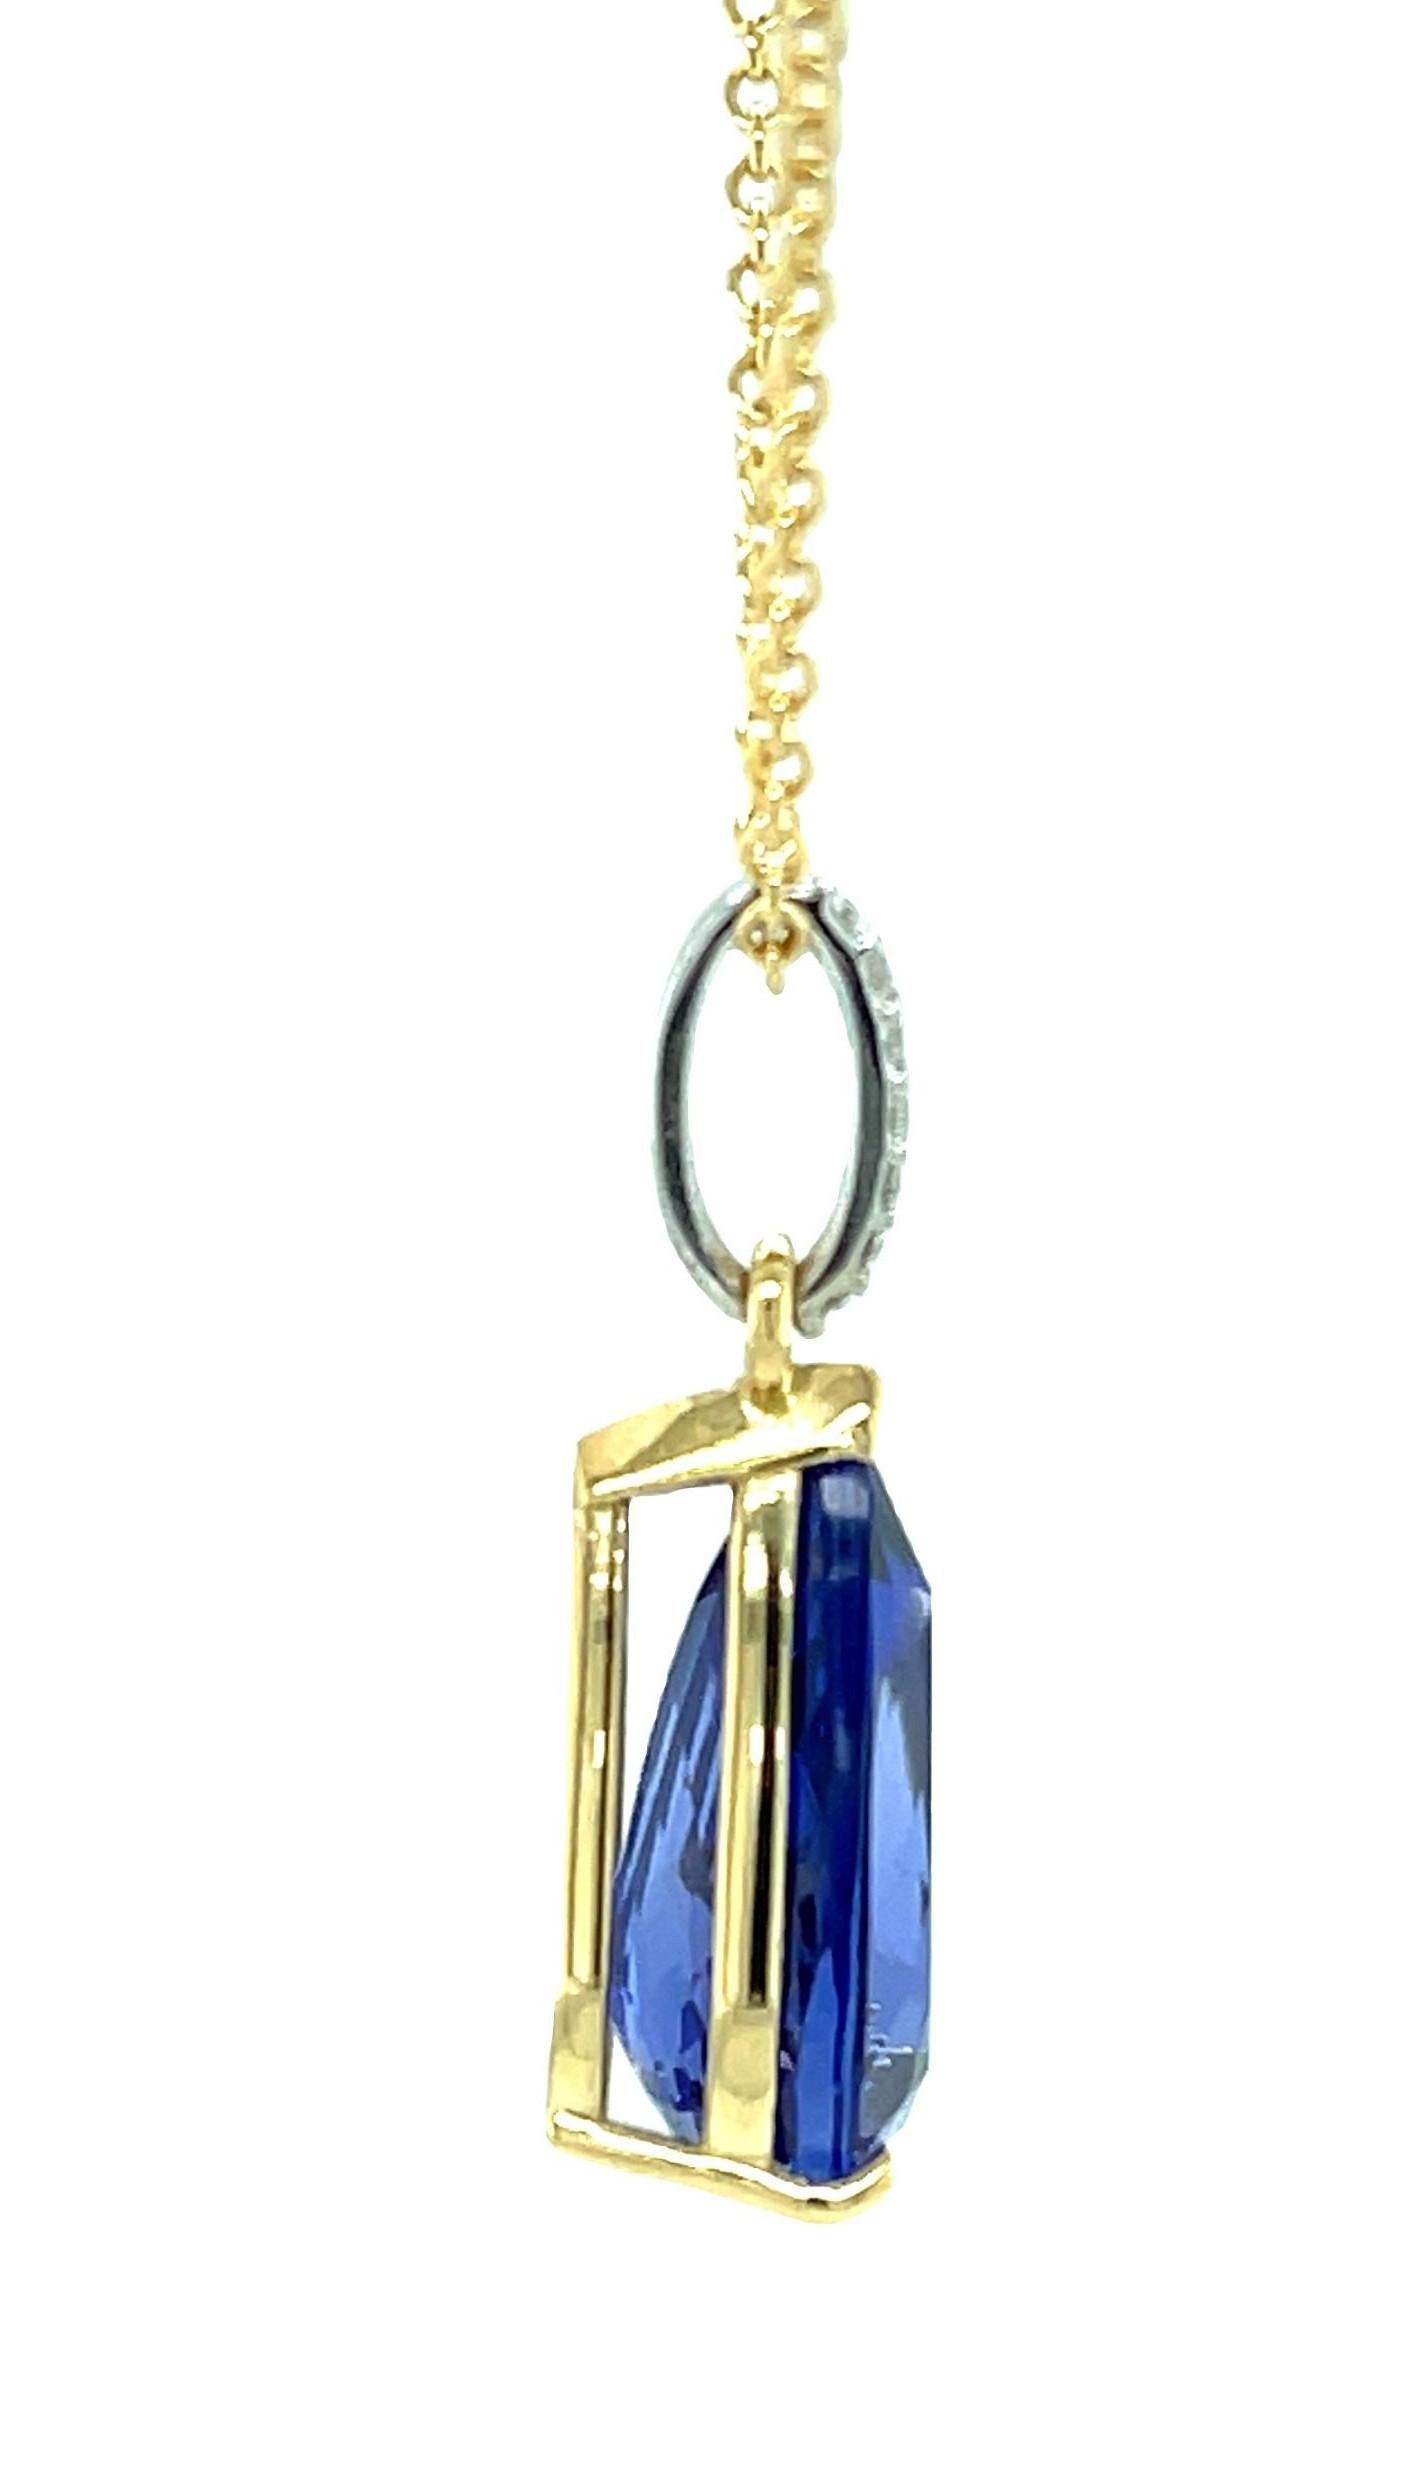 Pear Cut 8.90 Carat Tanzanite & Diamond Pendant Necklace in White and Yellow Gold For Sale